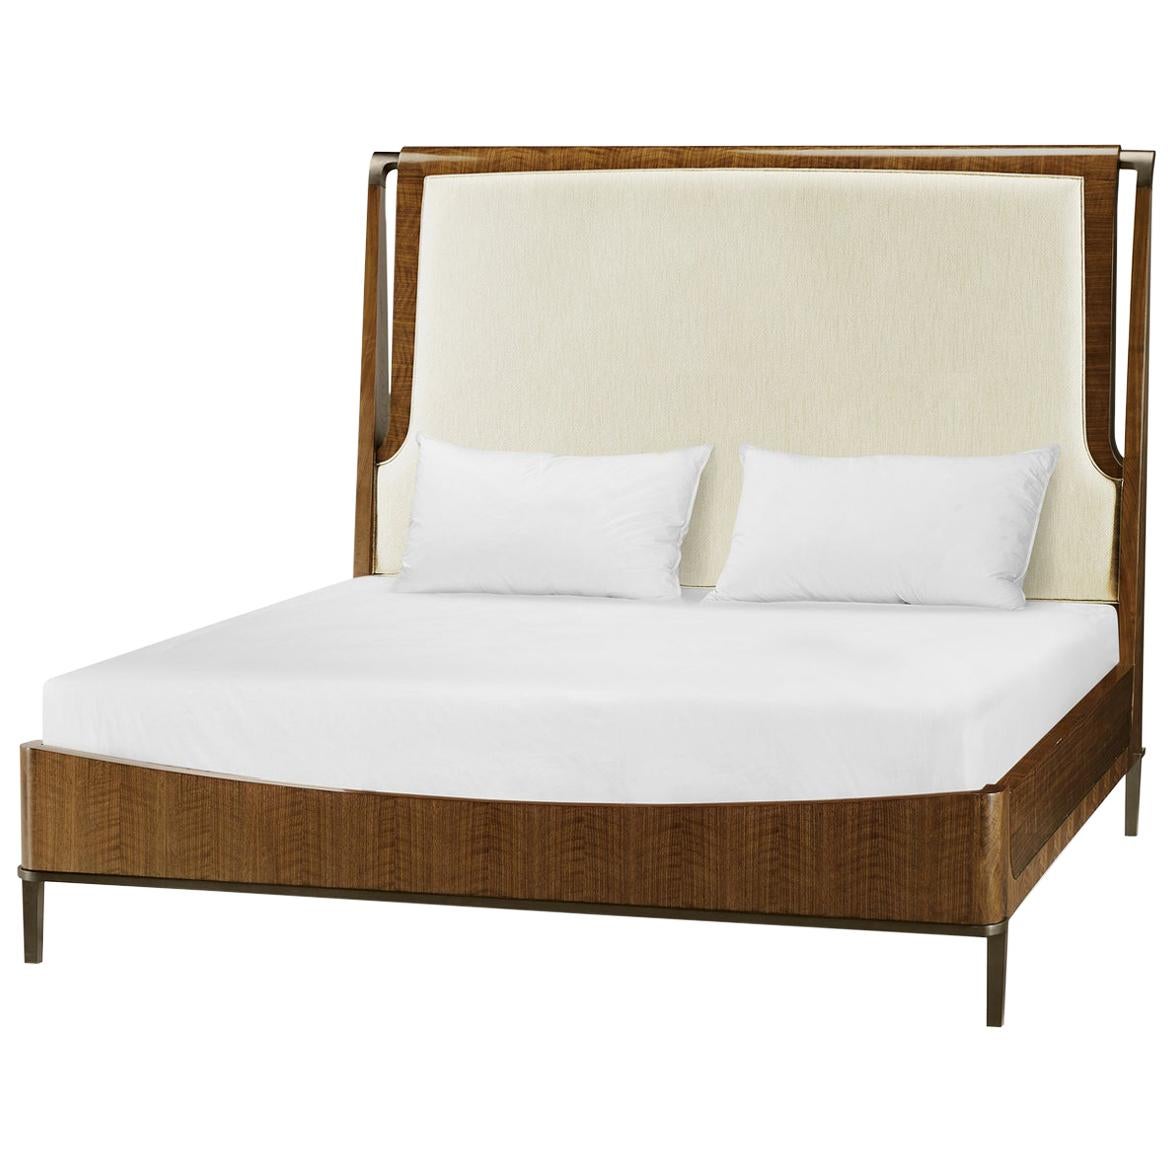 Midcentury Style Walnut Bed King For Sale